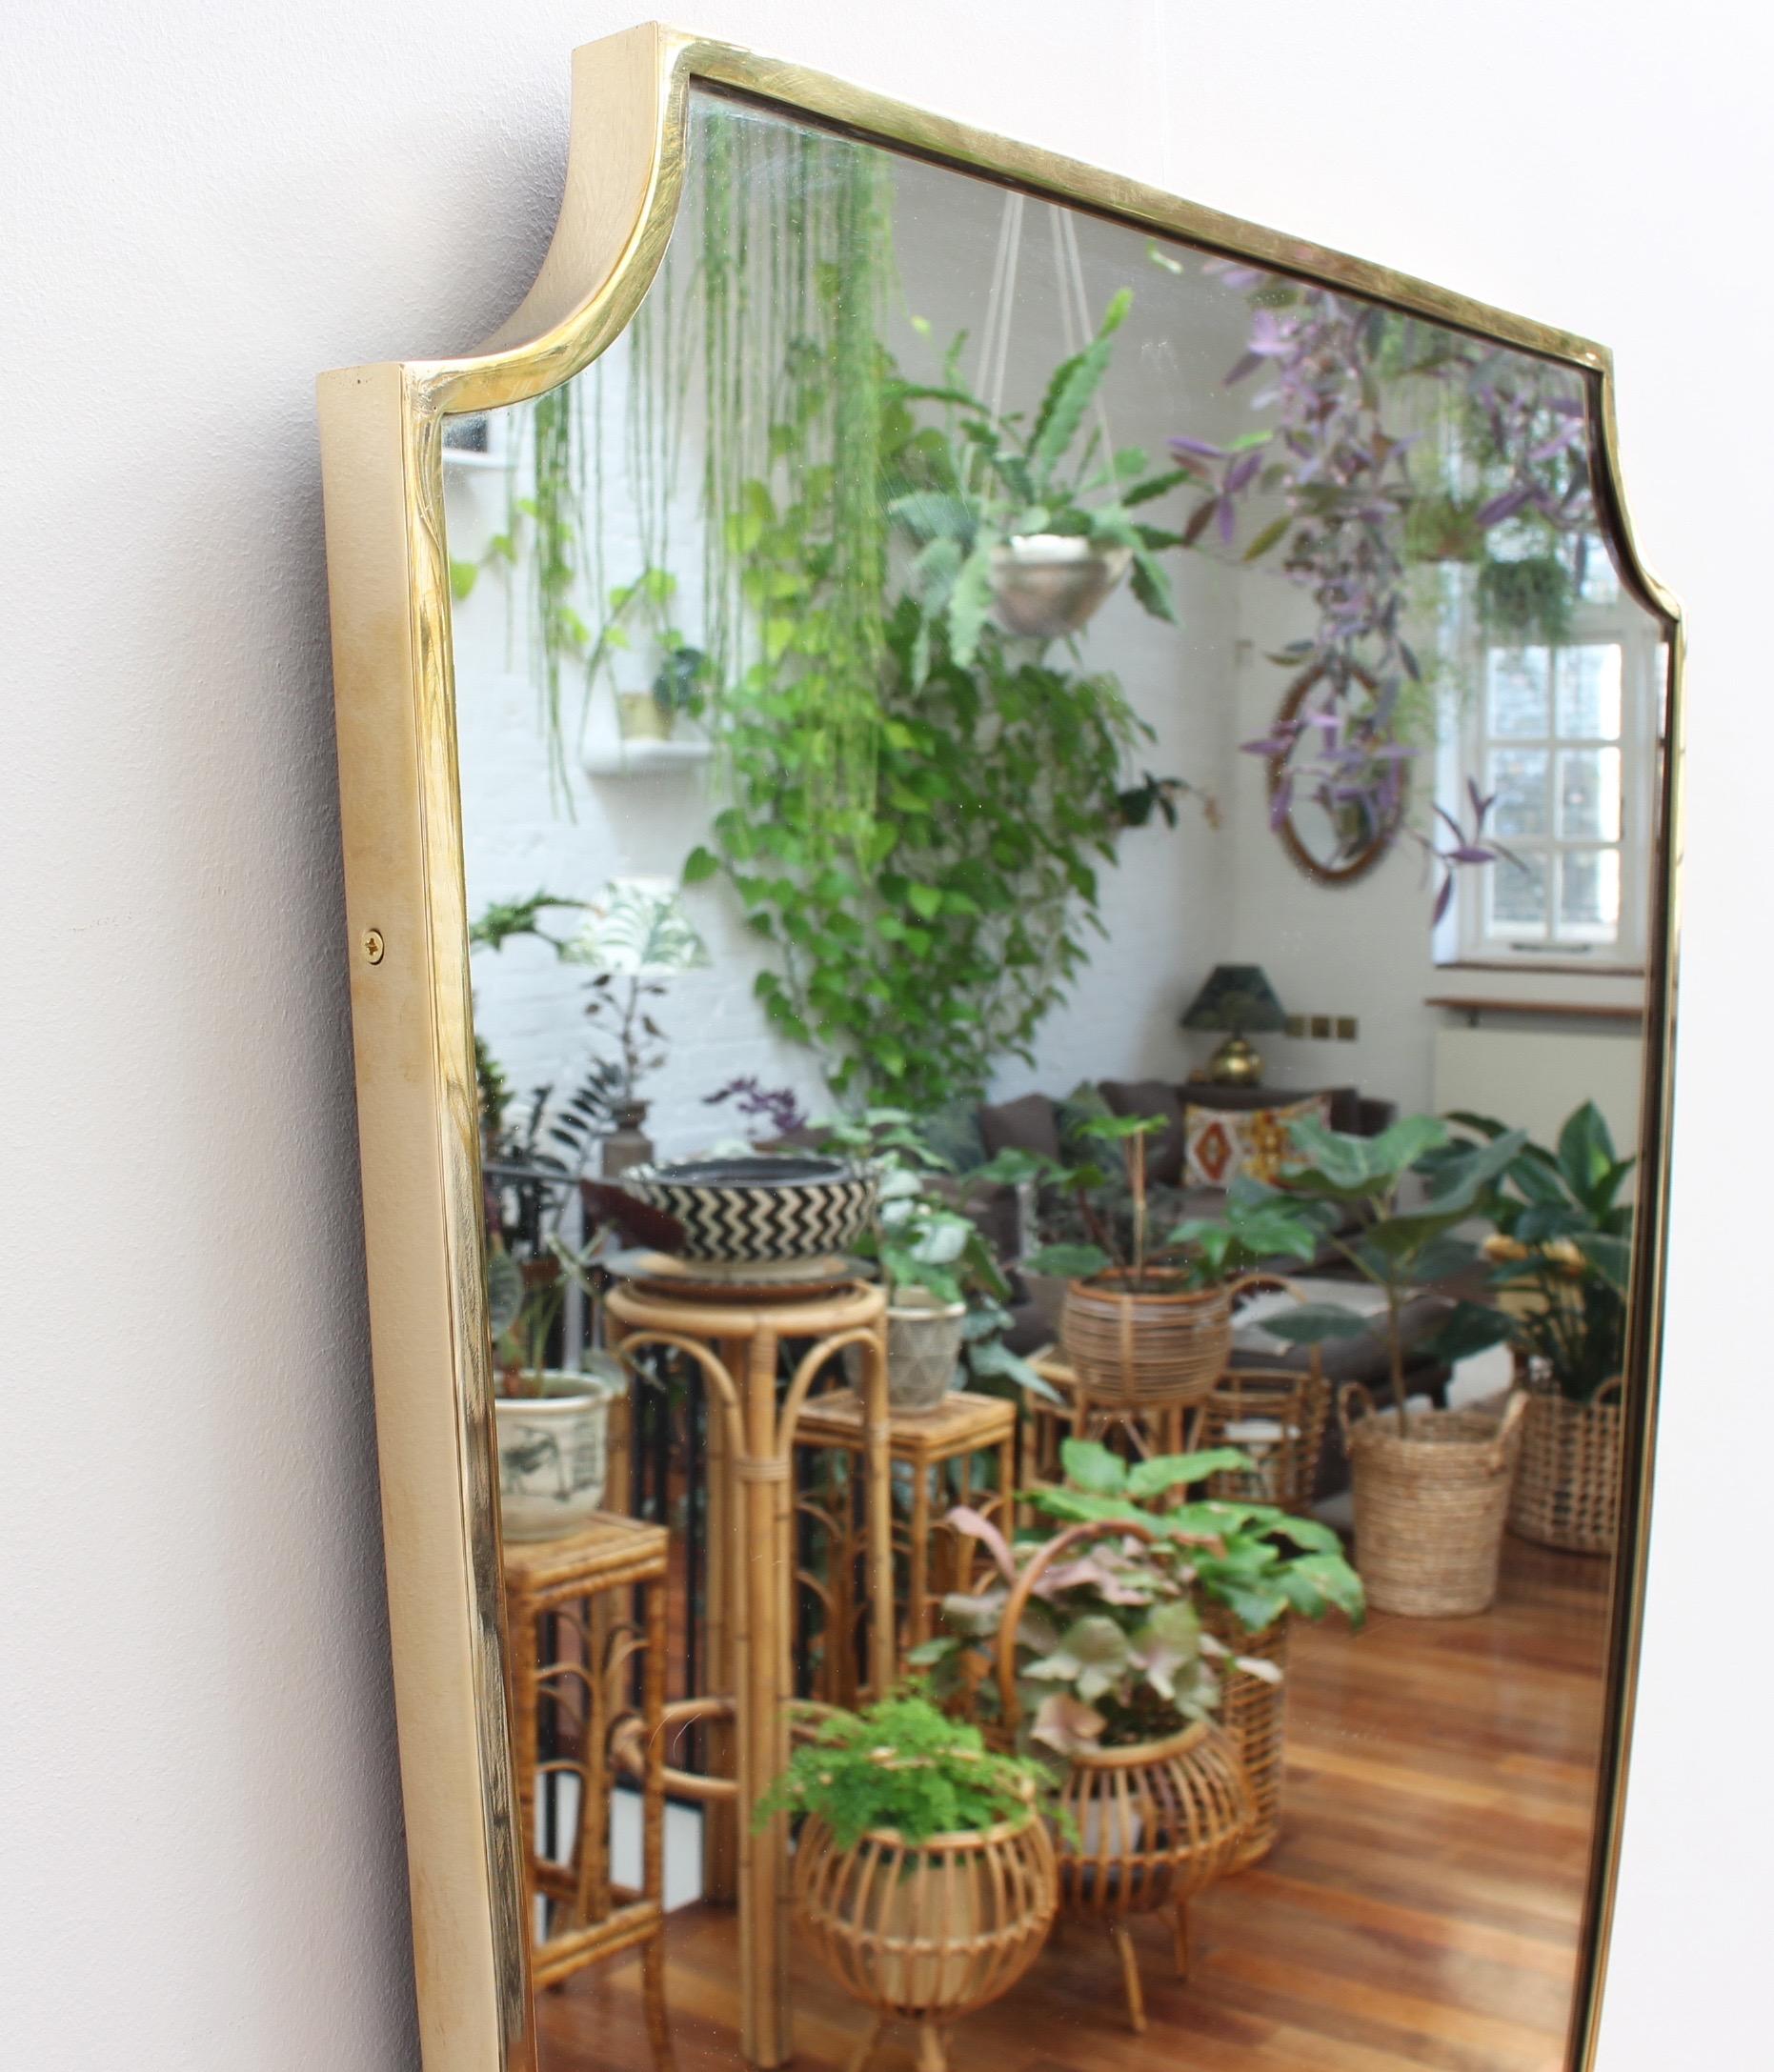 Mid-20th Century Midcentury Crest-Shaped Italian Wall Mirror with Brass Frame, 'circa 1950s'